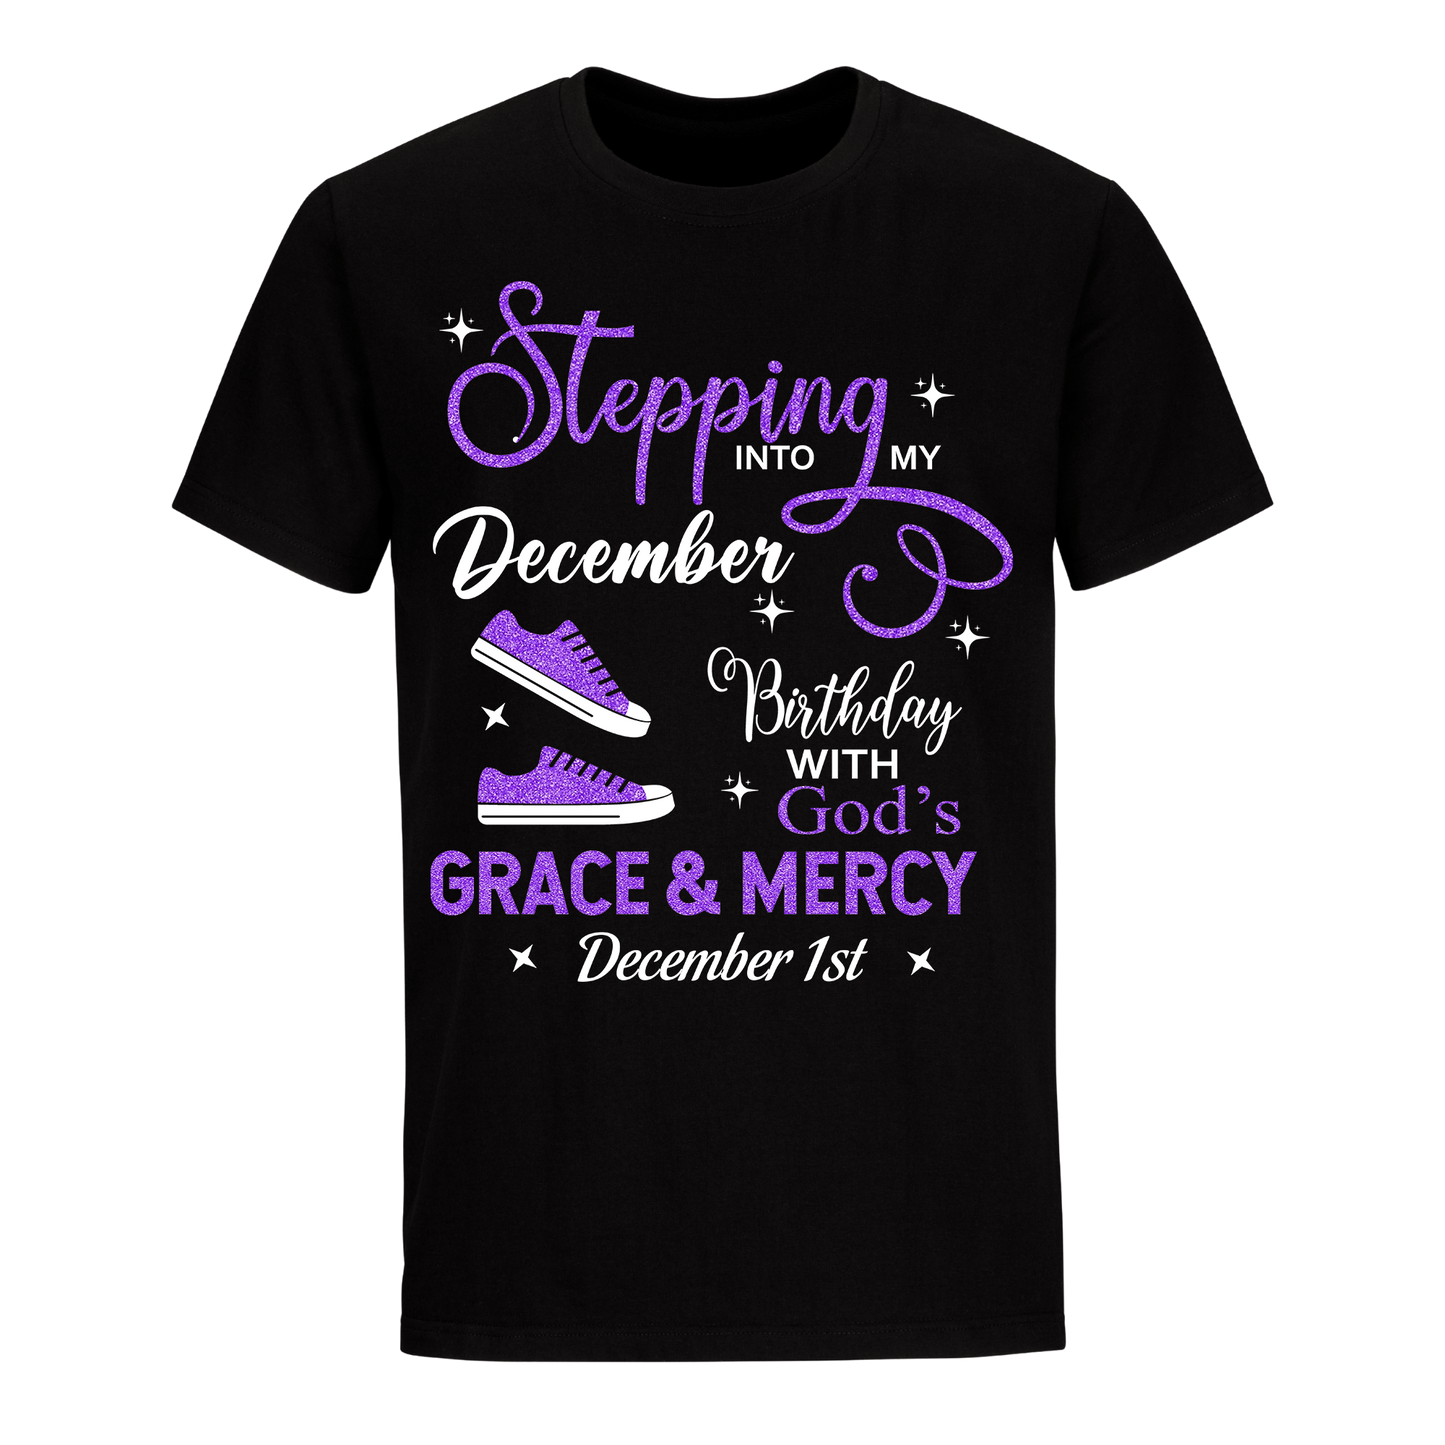 DECEMBER 01 GRACE AND MERCY